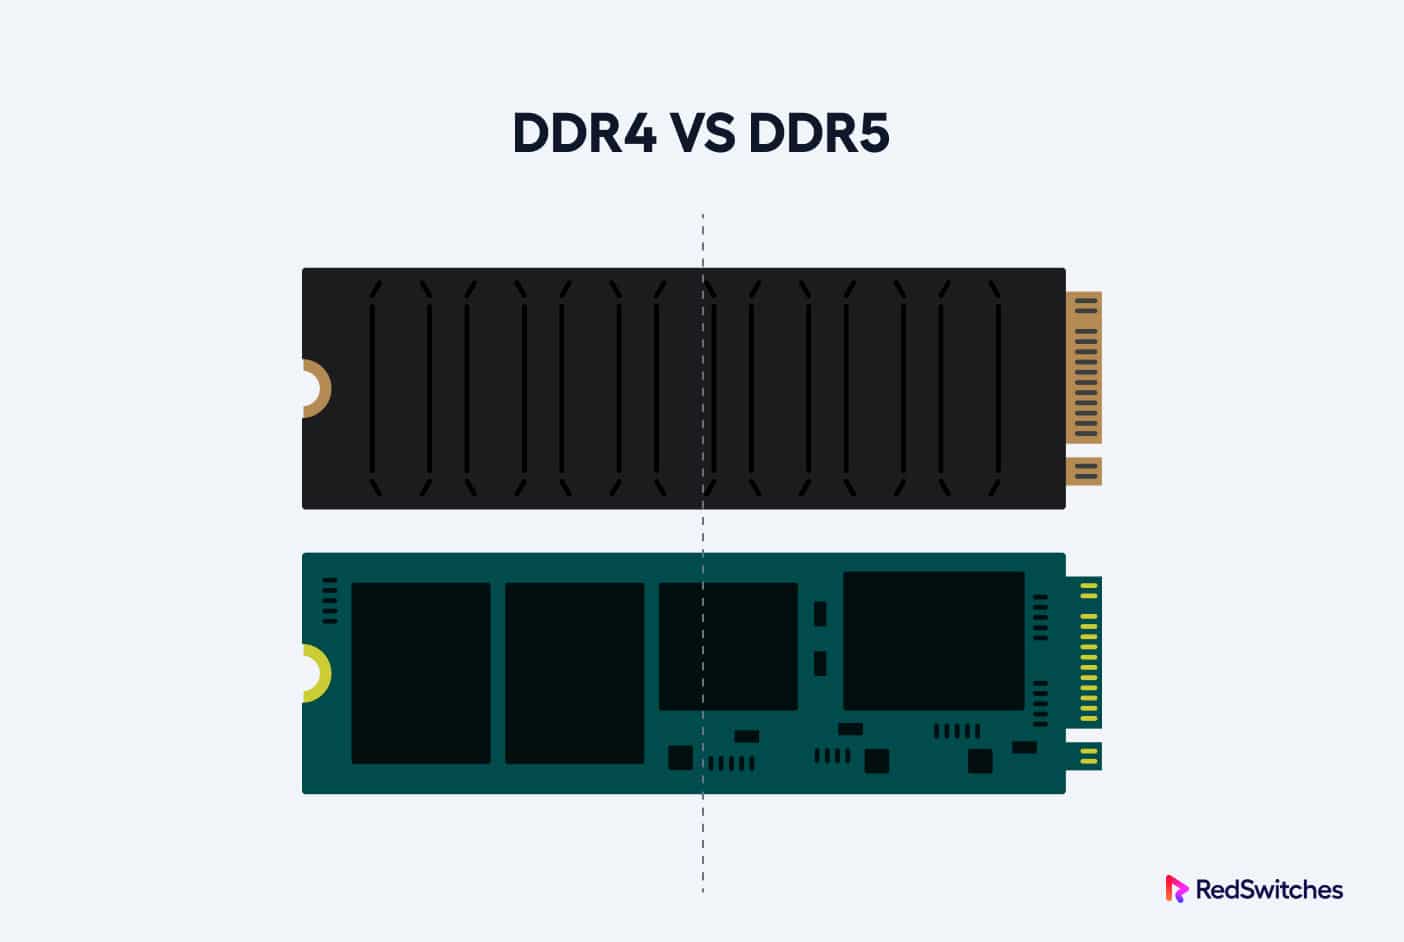 DDR3 vs DDR4 RAM: Which is better?